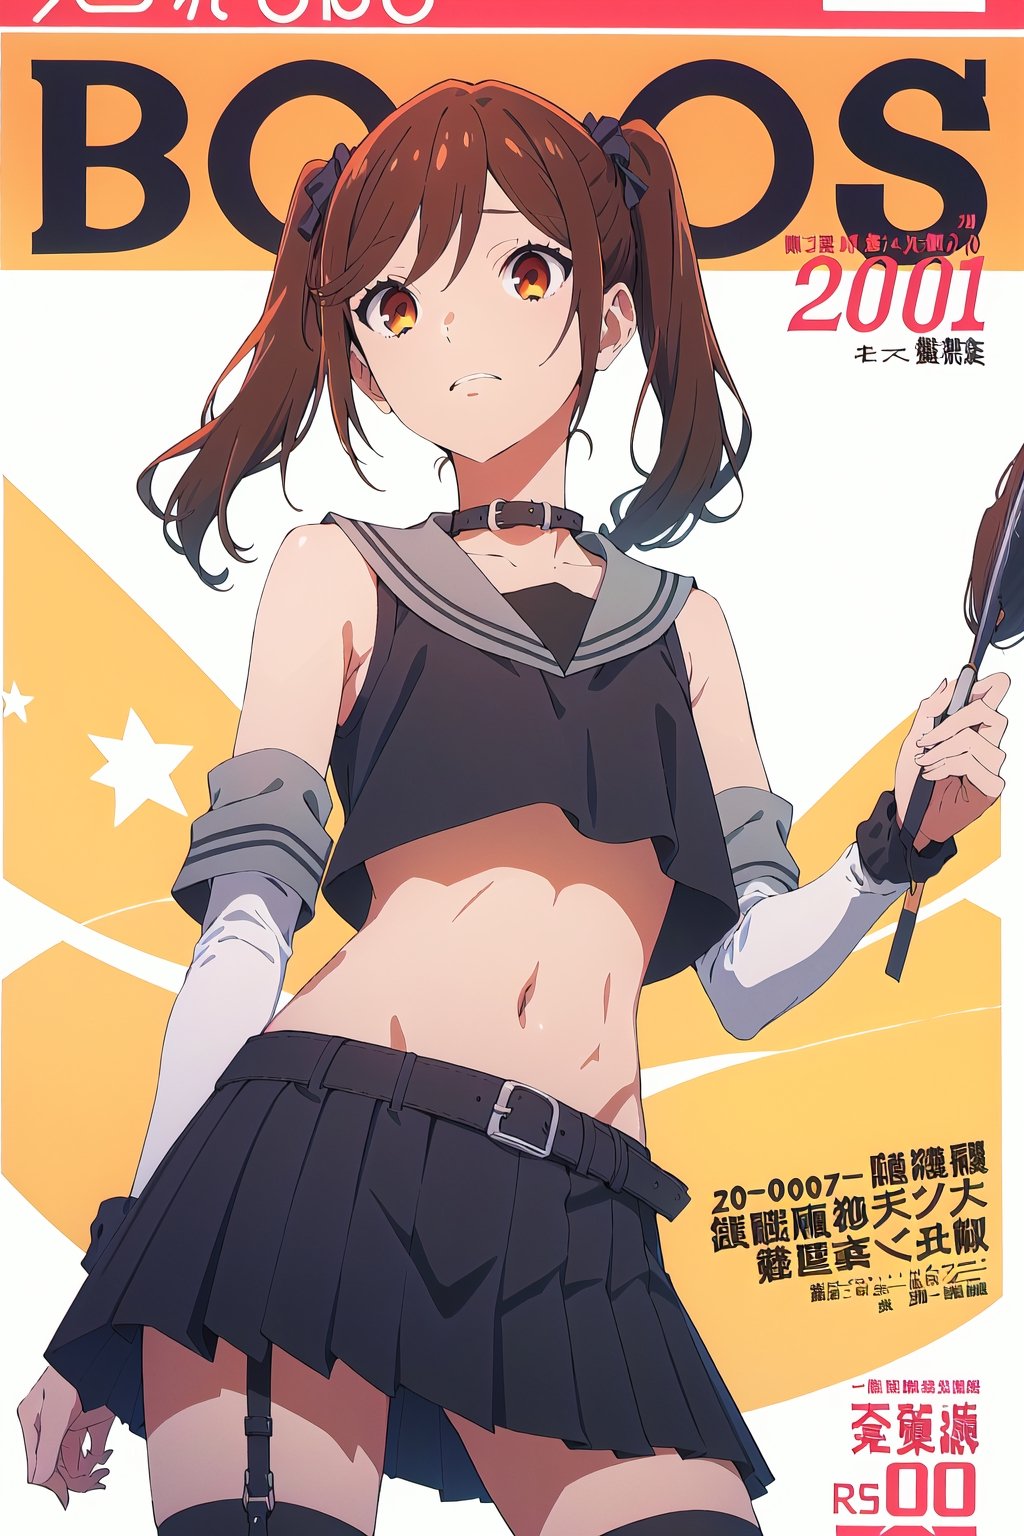 2000s fashion,horimiya_hori,1girl,20 years old,brown eyes,magazine cover,modeling pose, standing,foreground,pov_eye_contact, pigtails hair,punk skirt, tight crop top, bare belly, brush, stockings,arm warmers, gothic belt, collar